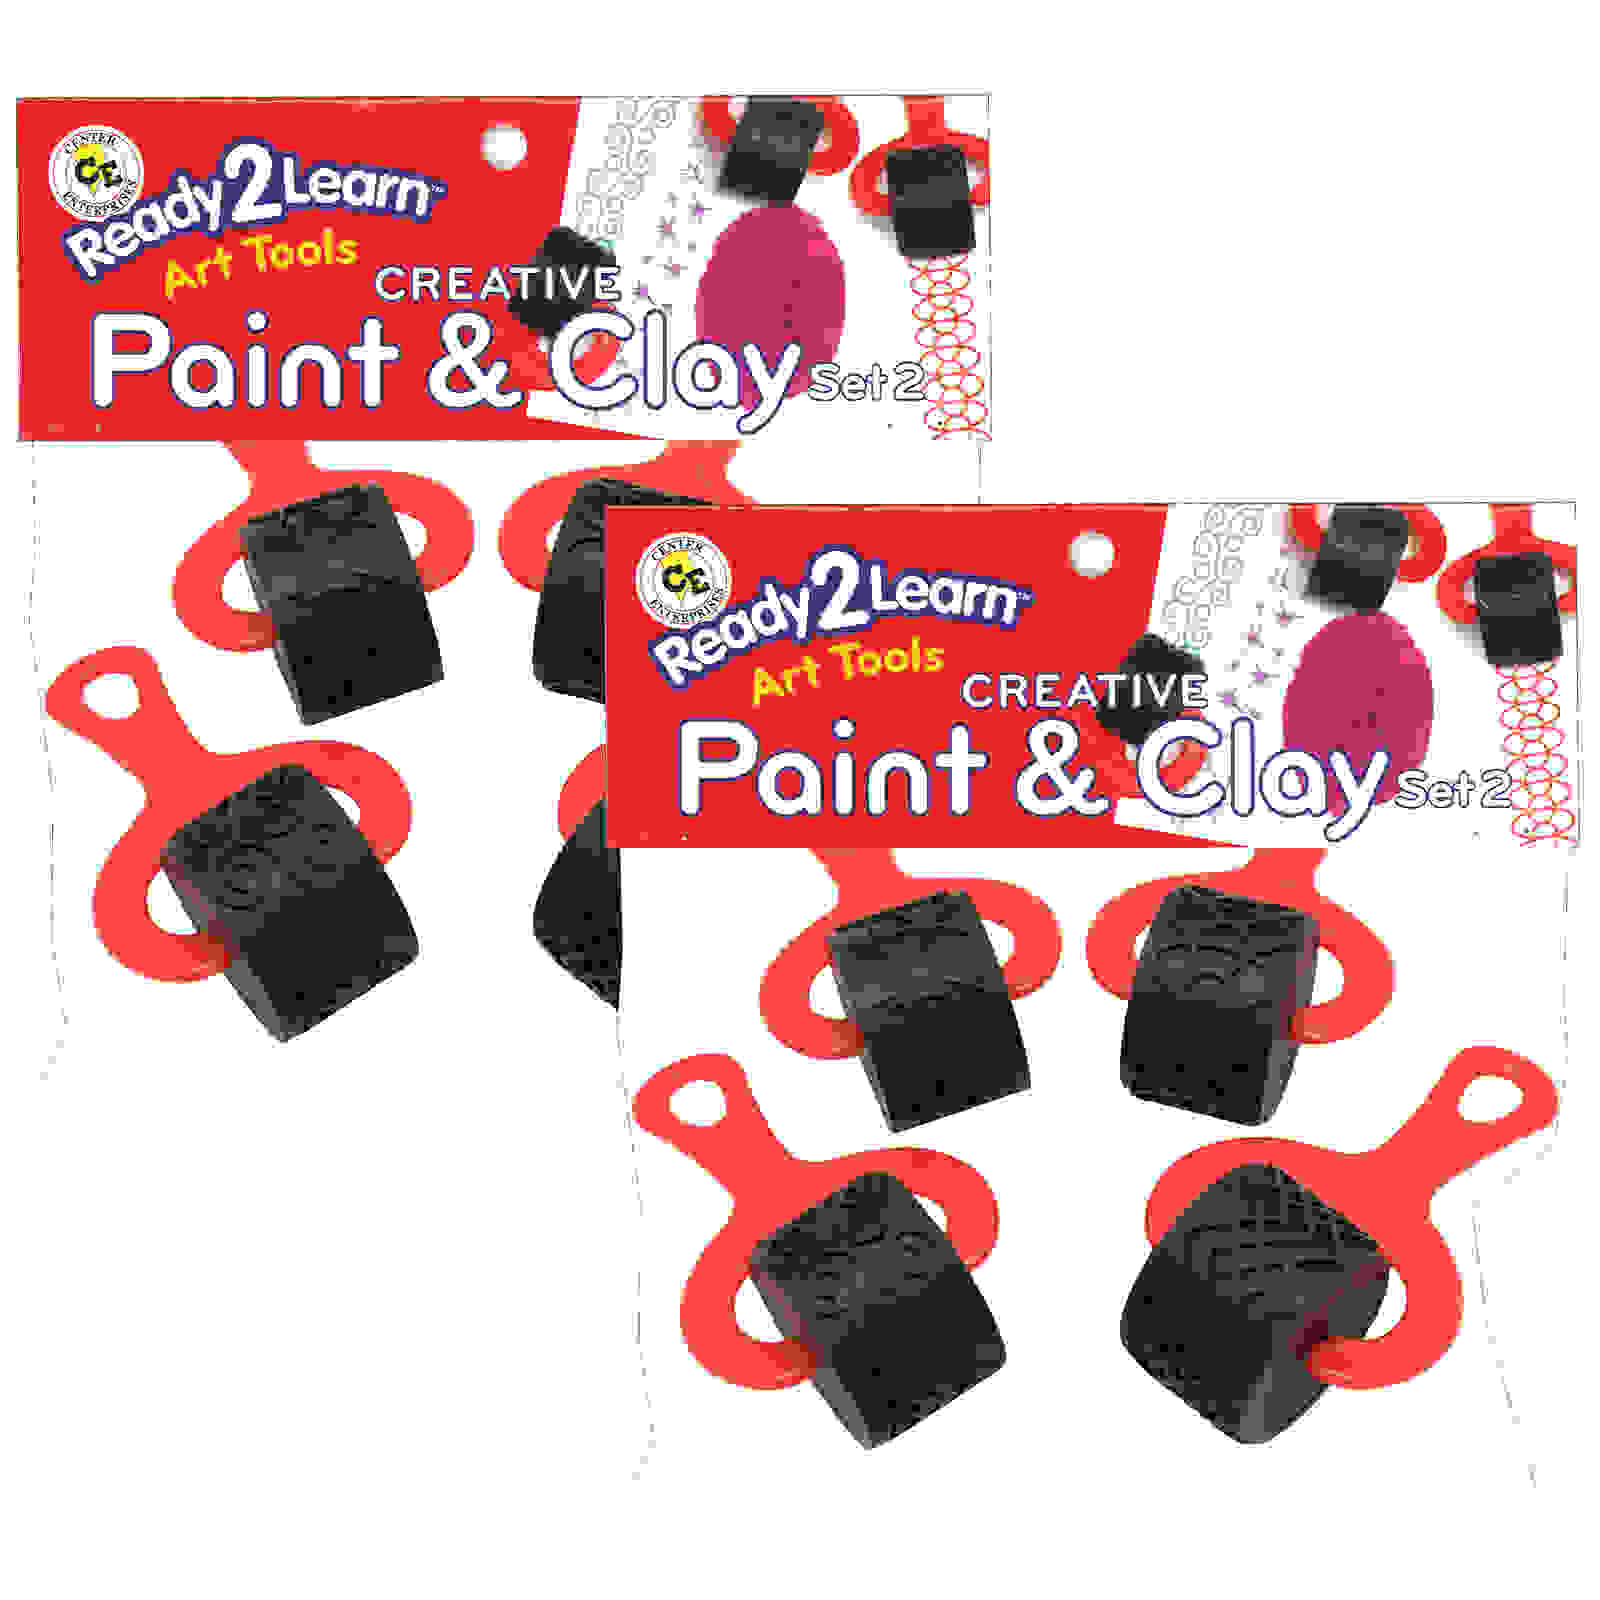 Ready2Learn Paint and Clay Explorer Rollers, 4 Per Set, 2 Sets